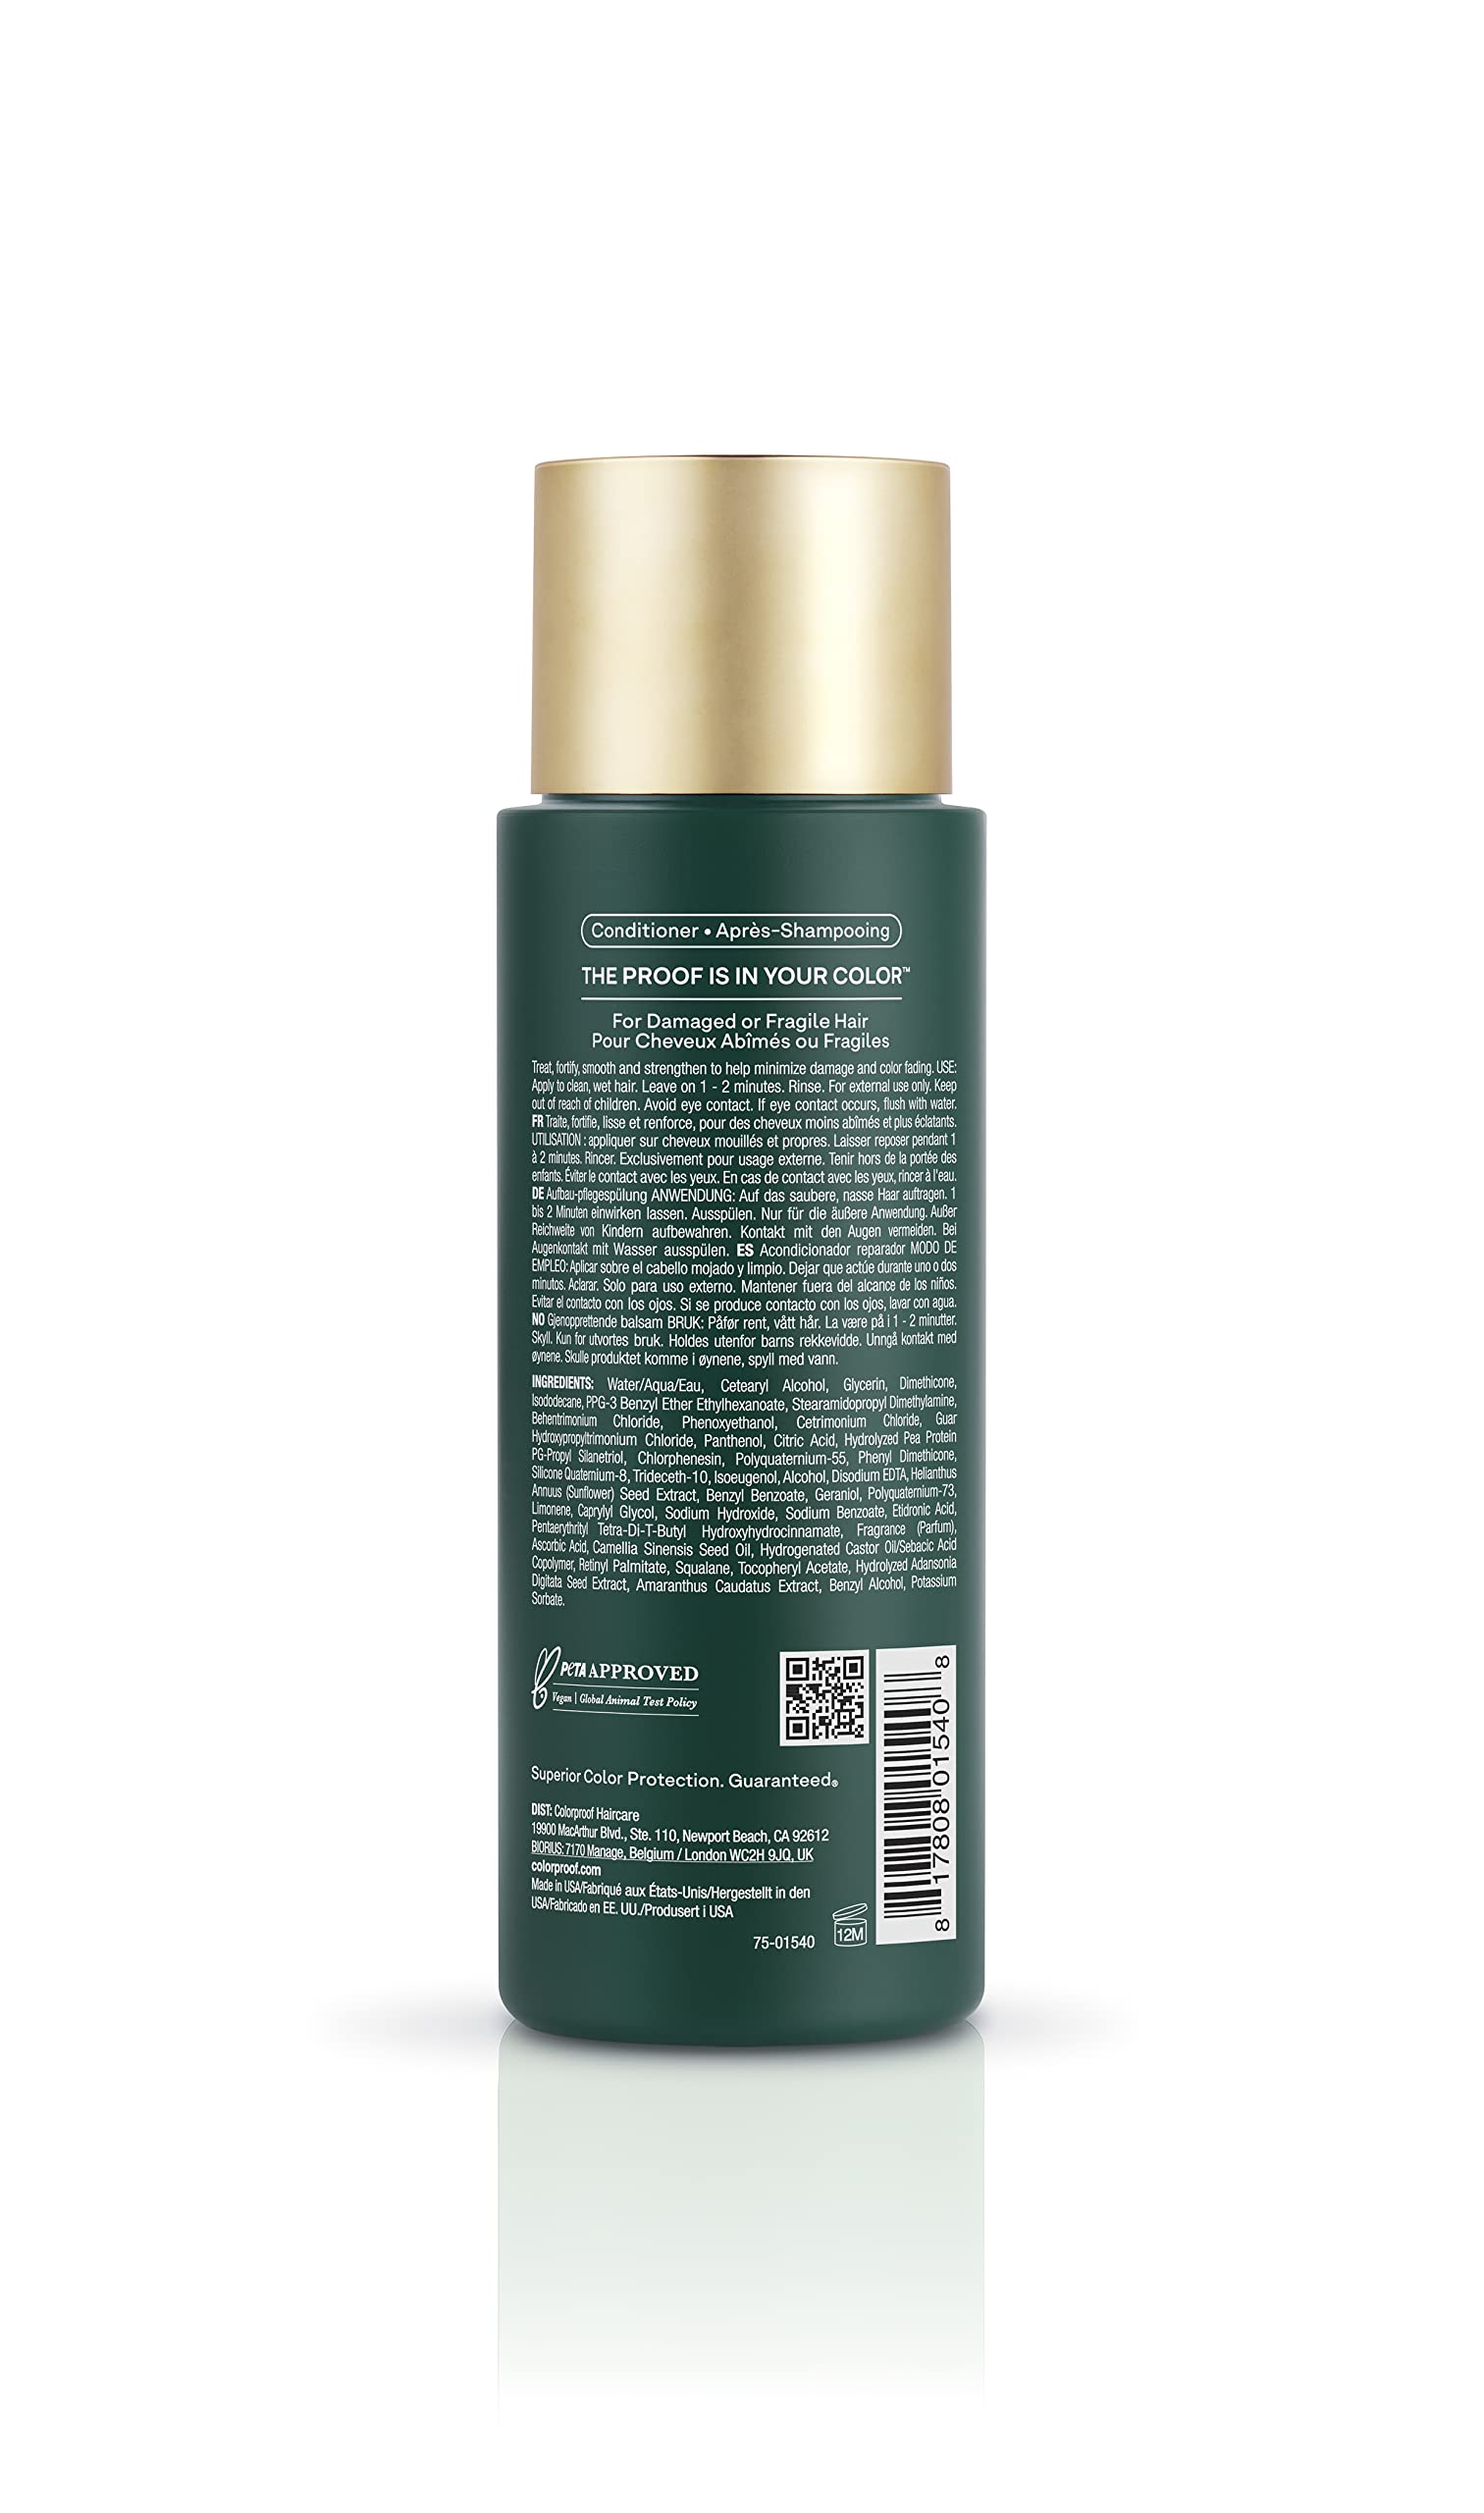 Colorproof Baobab Recovery Conditioner, 8.5oz - For Damaged Color-Treated Hair, Strengthens & Repairs, Sulfate-Free, Vegan